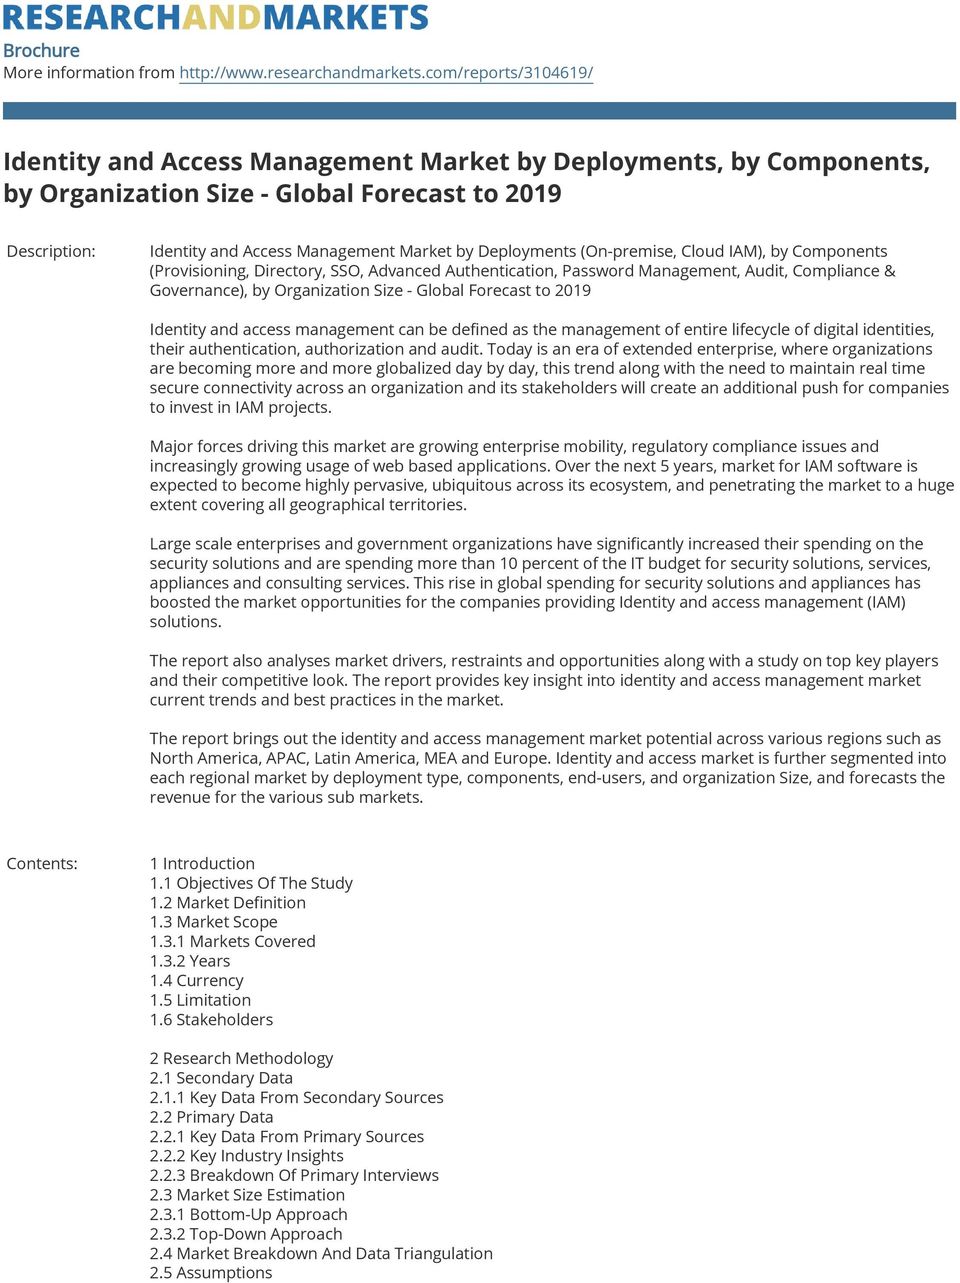 Deployments (On-premise, Cloud IAM), by Components (Provisioning, Directory, SSO, Advanced Authentication, Password Management, Audit, Compliance & Governance), by Organization Size - Global Forecast